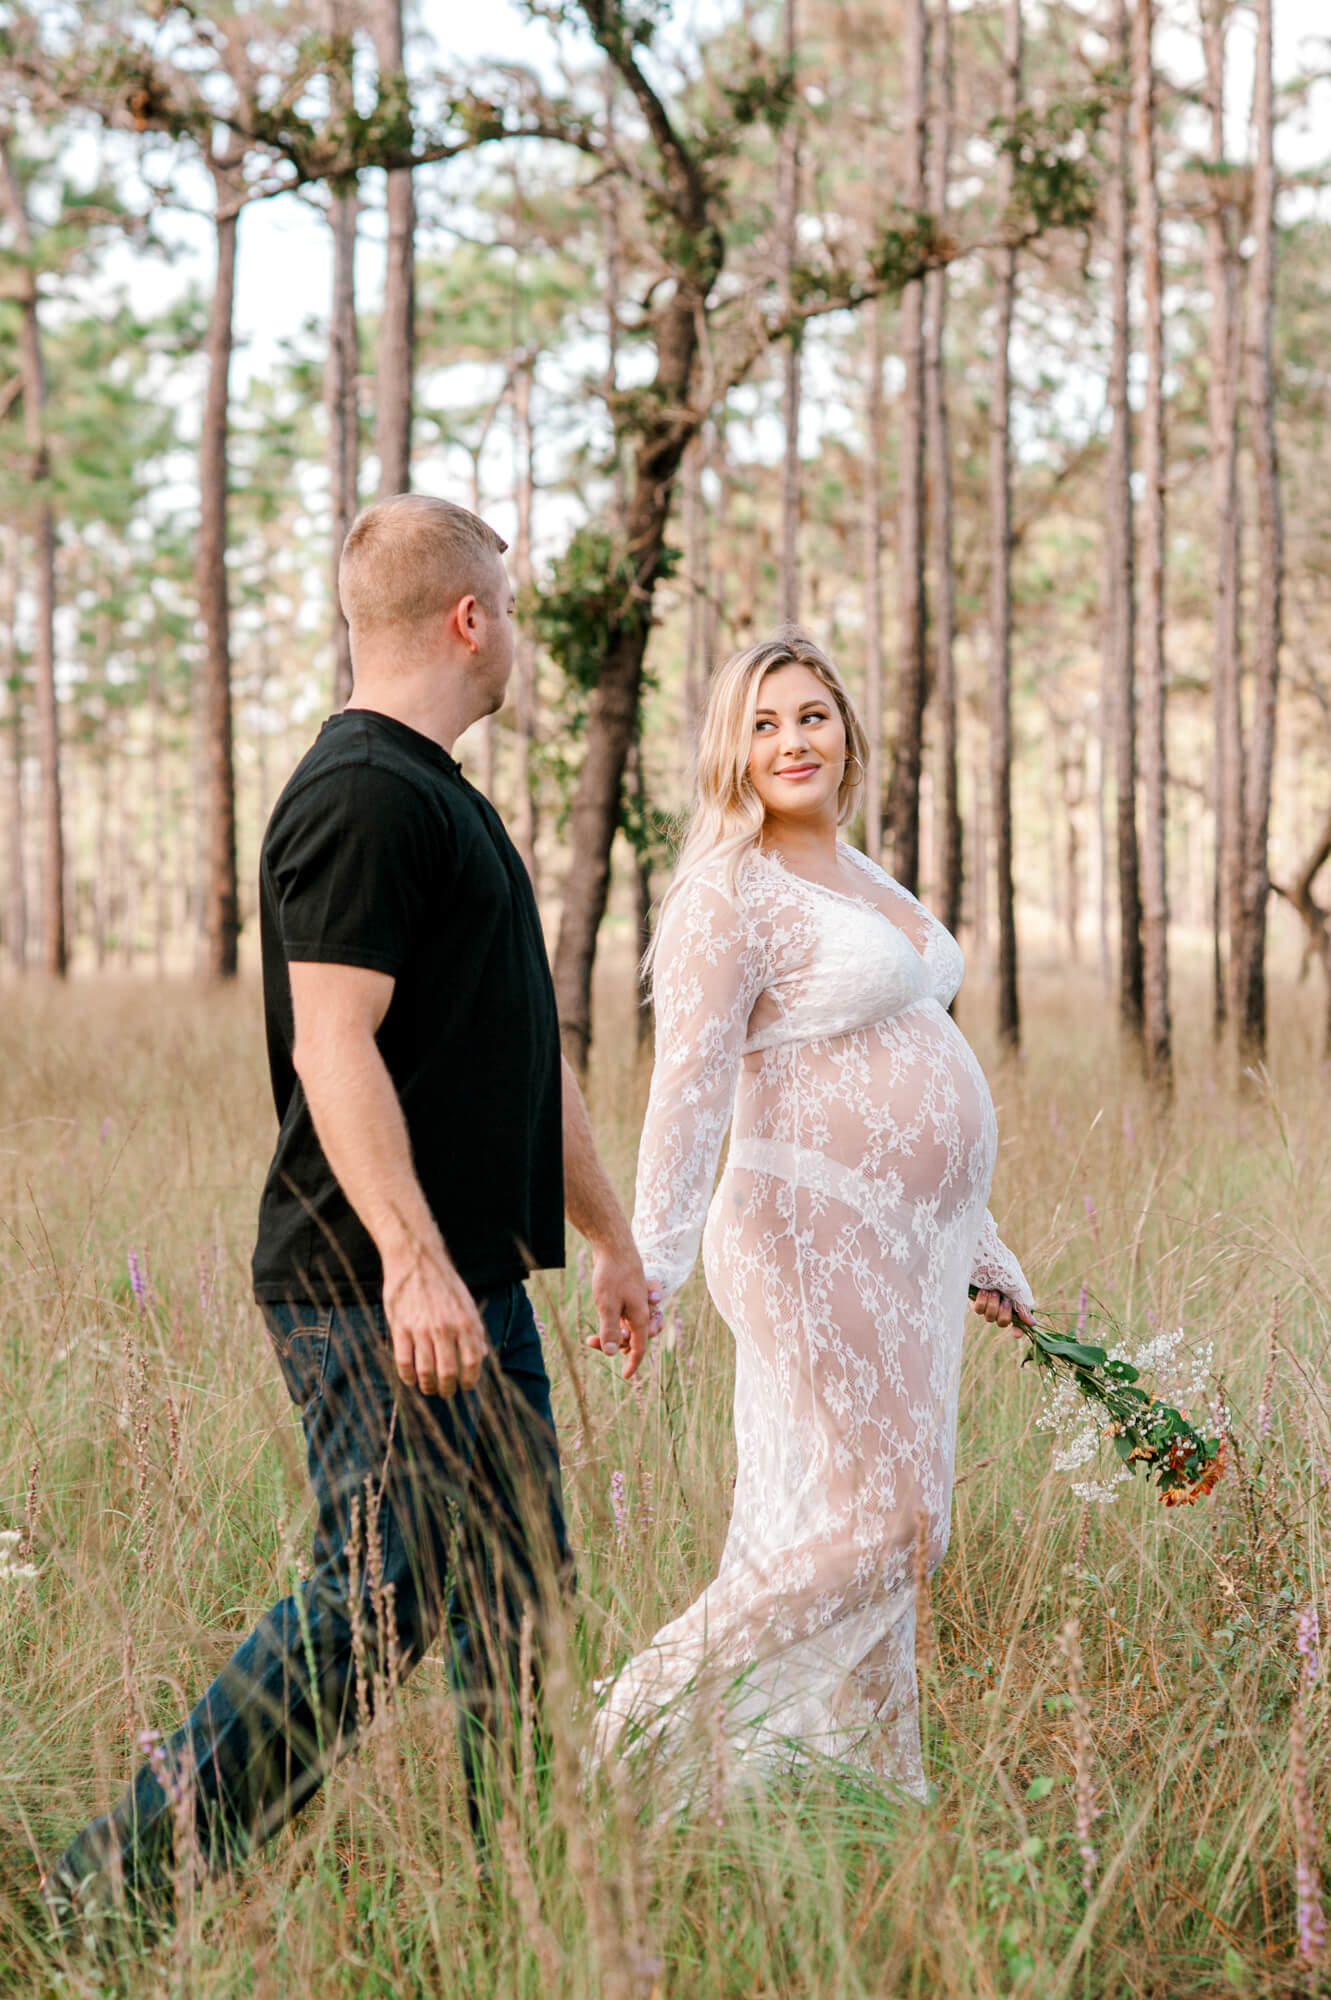 Stunning soon to be new parents walk through the tall grass hand in hand.